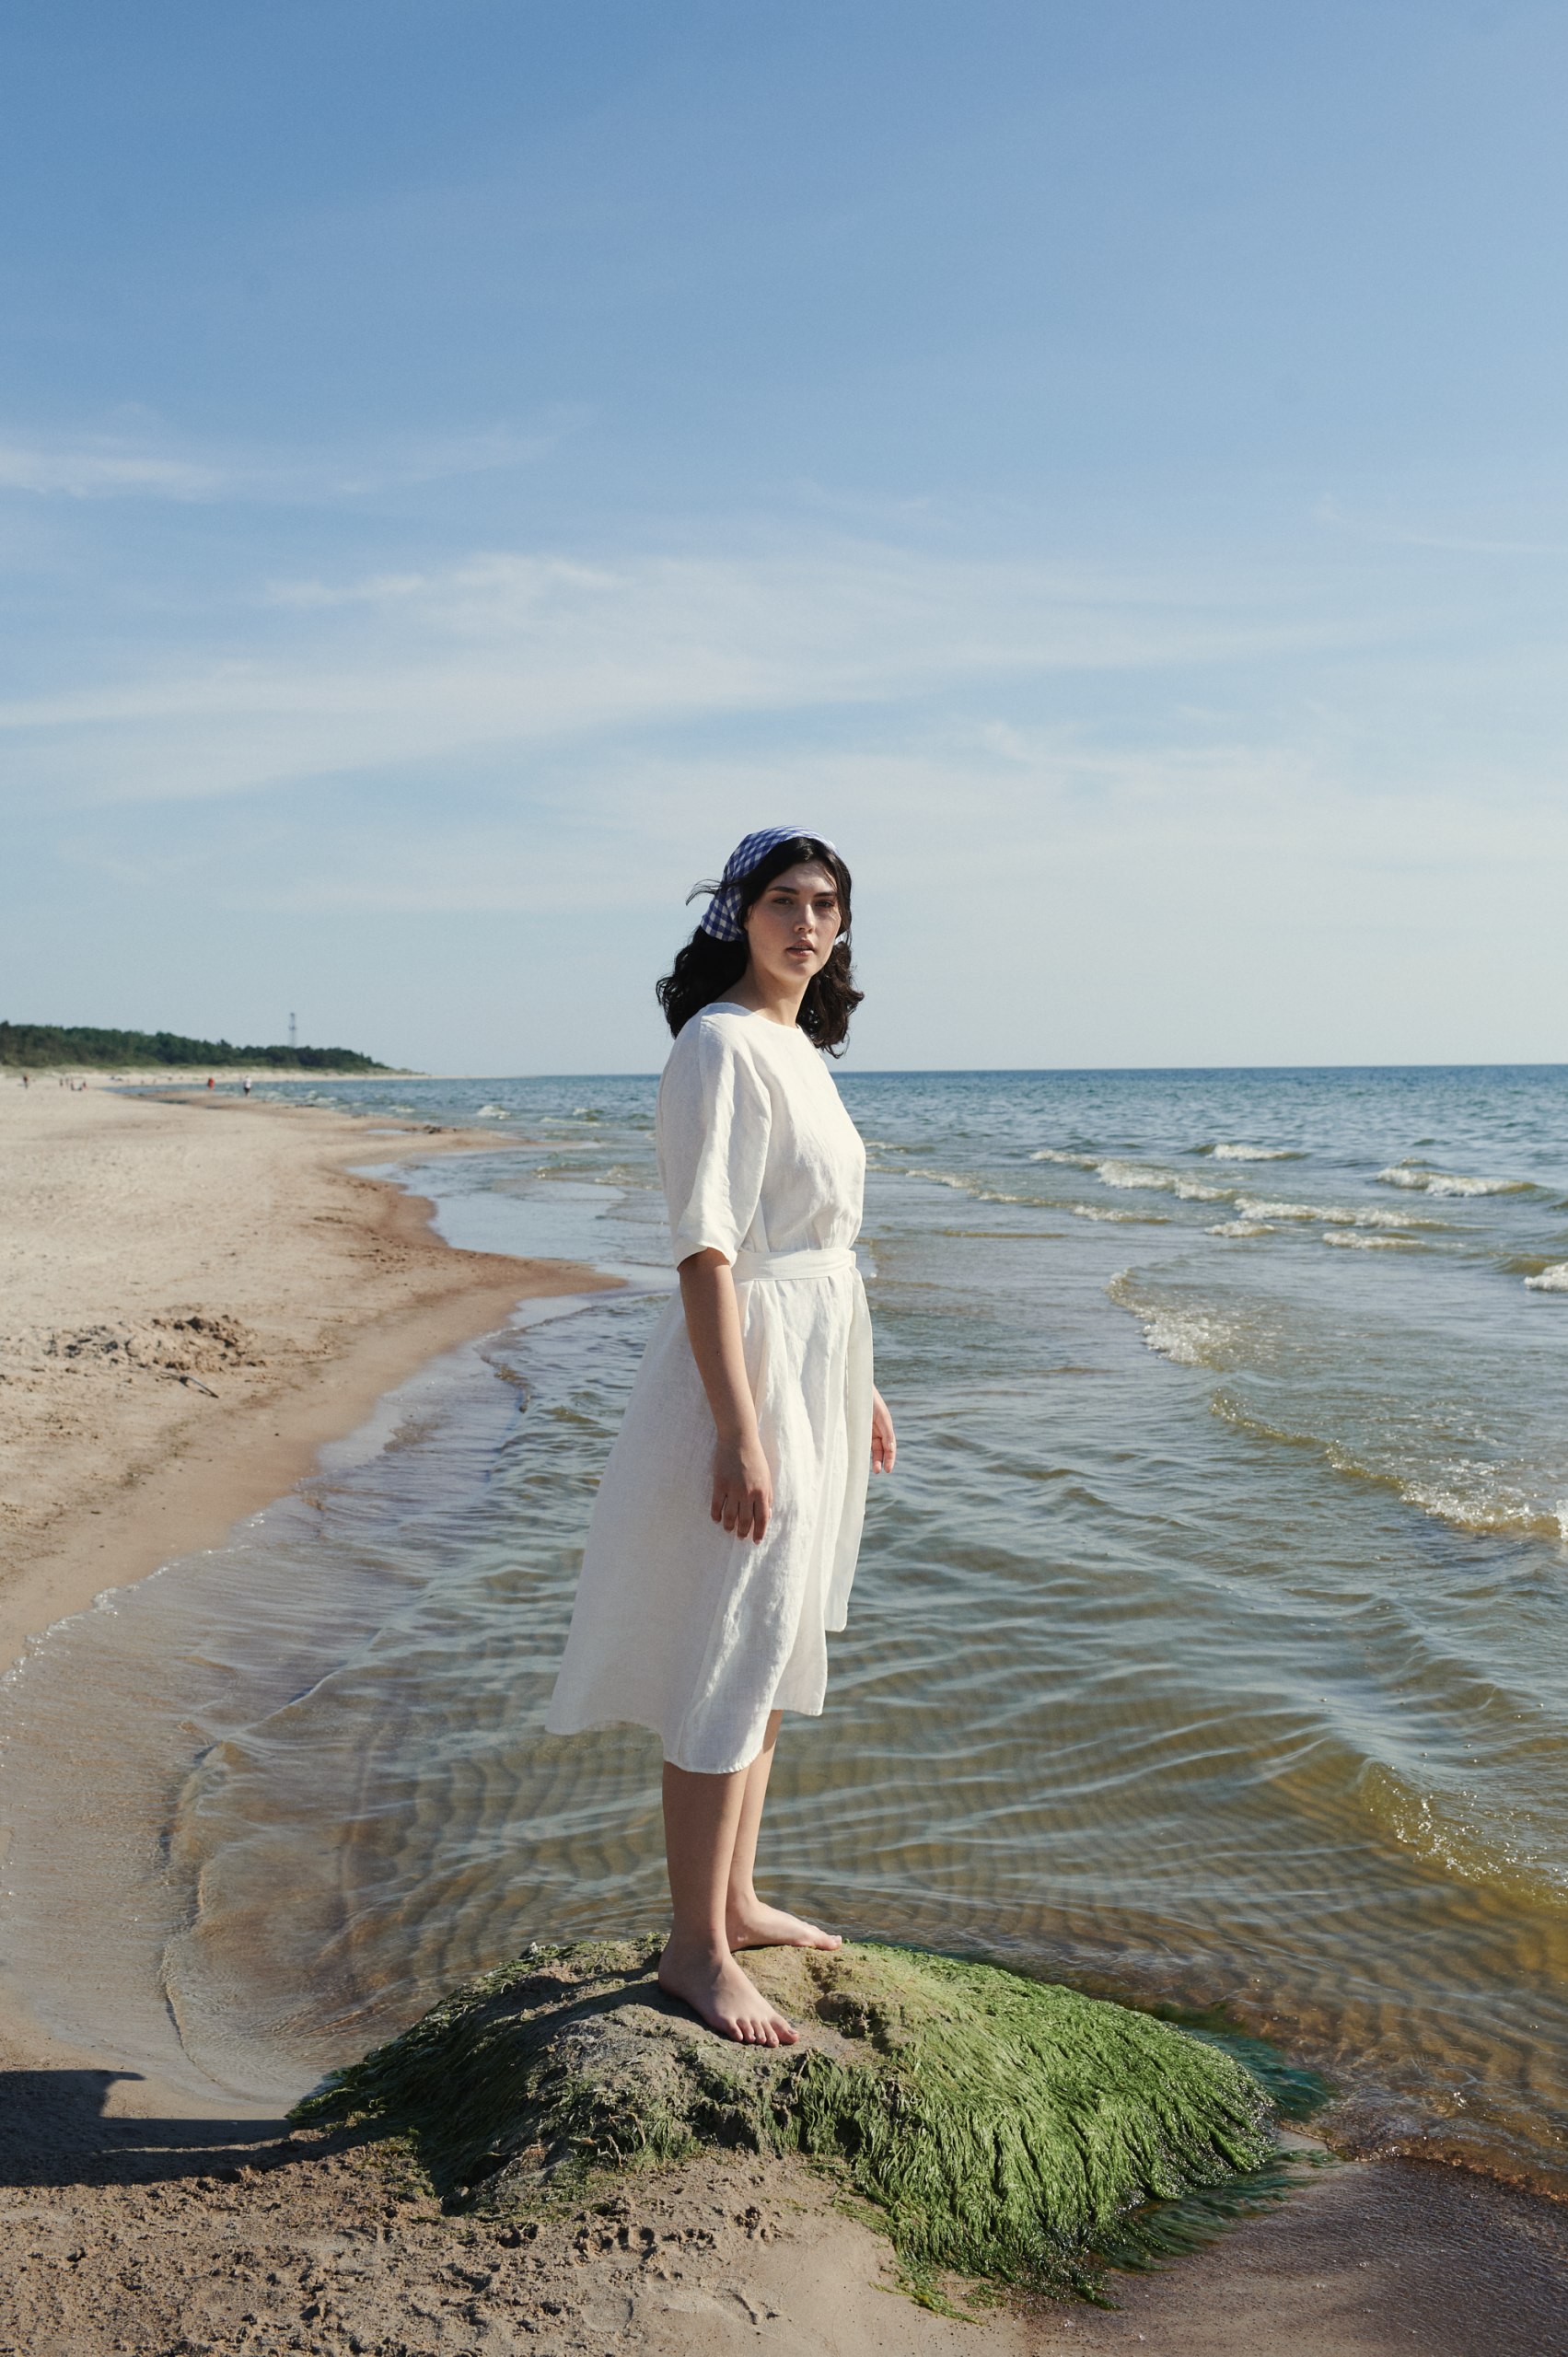 Lady by the sea wearing white dress